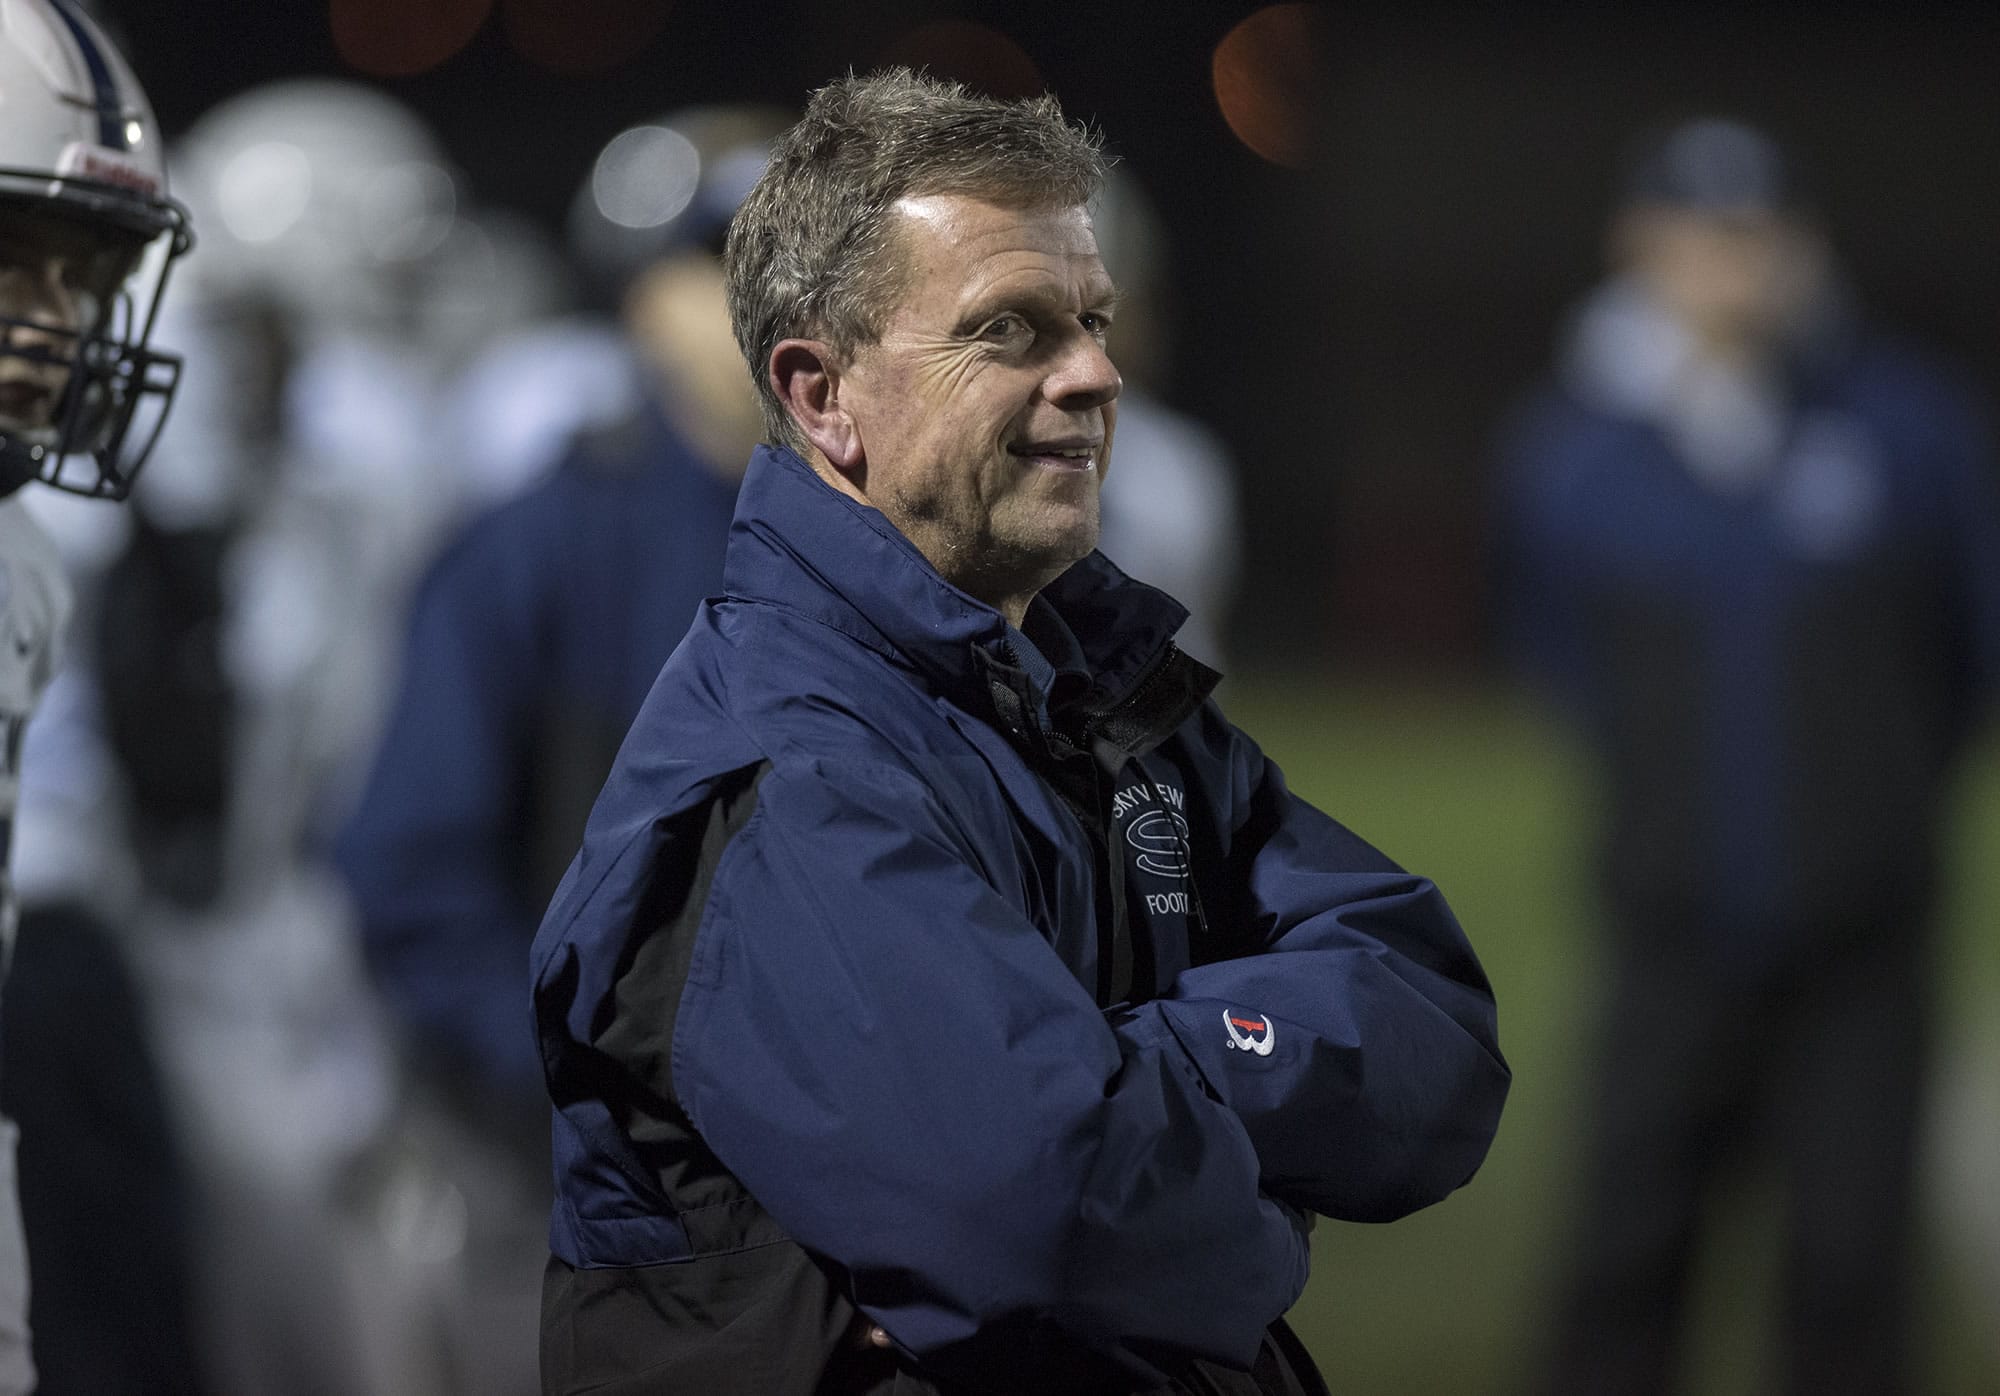 Skyview coach Steve Kizer won his 100th game Thursday night at Battle Ground District Stadium on Oct. 12, 2017.